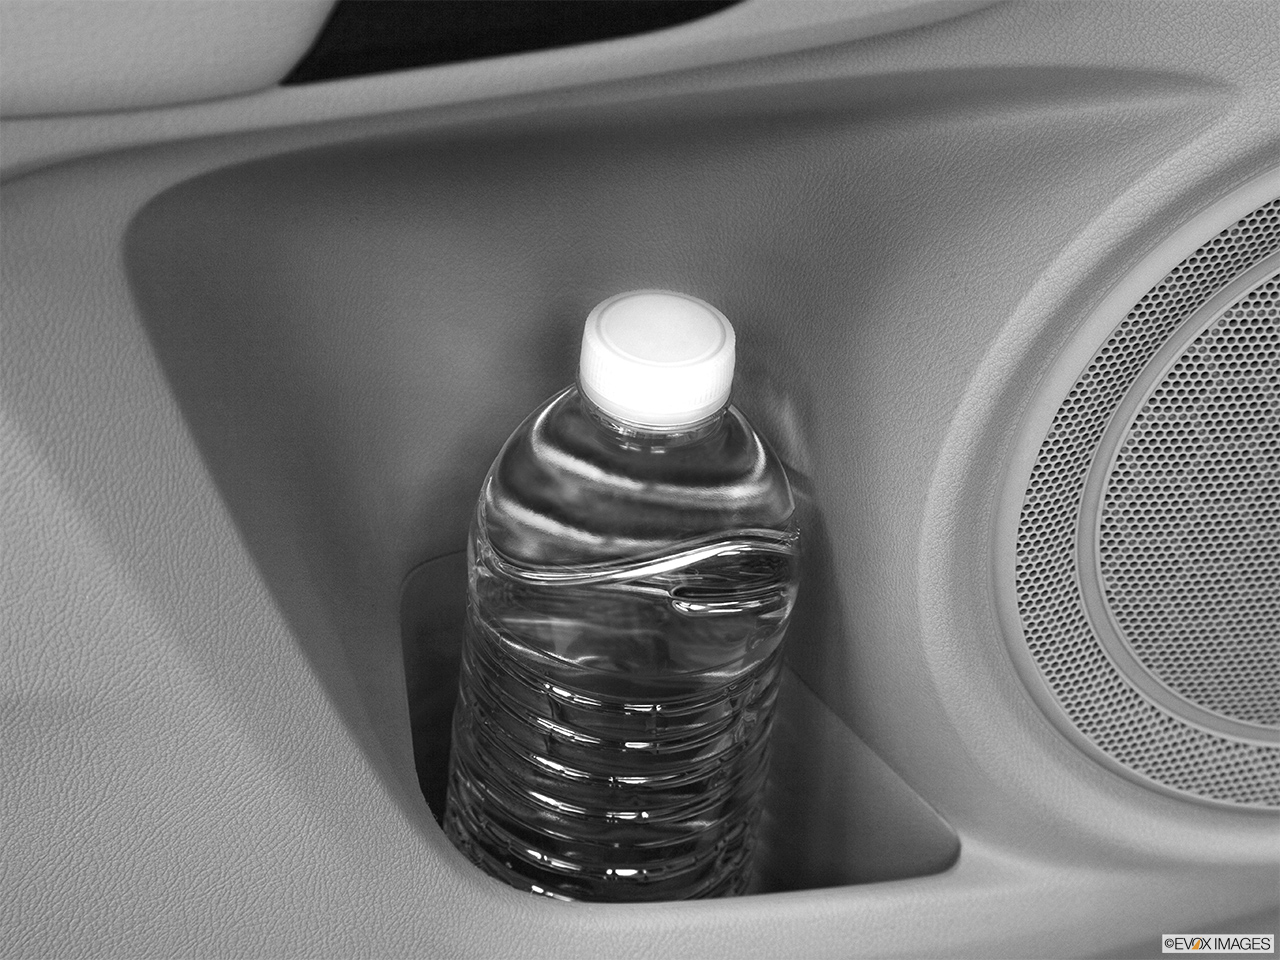 2013 Acura TSX Sport Wagon Base Second row side cup holder with coffee prop, or second row door cup holder with water bottle. 